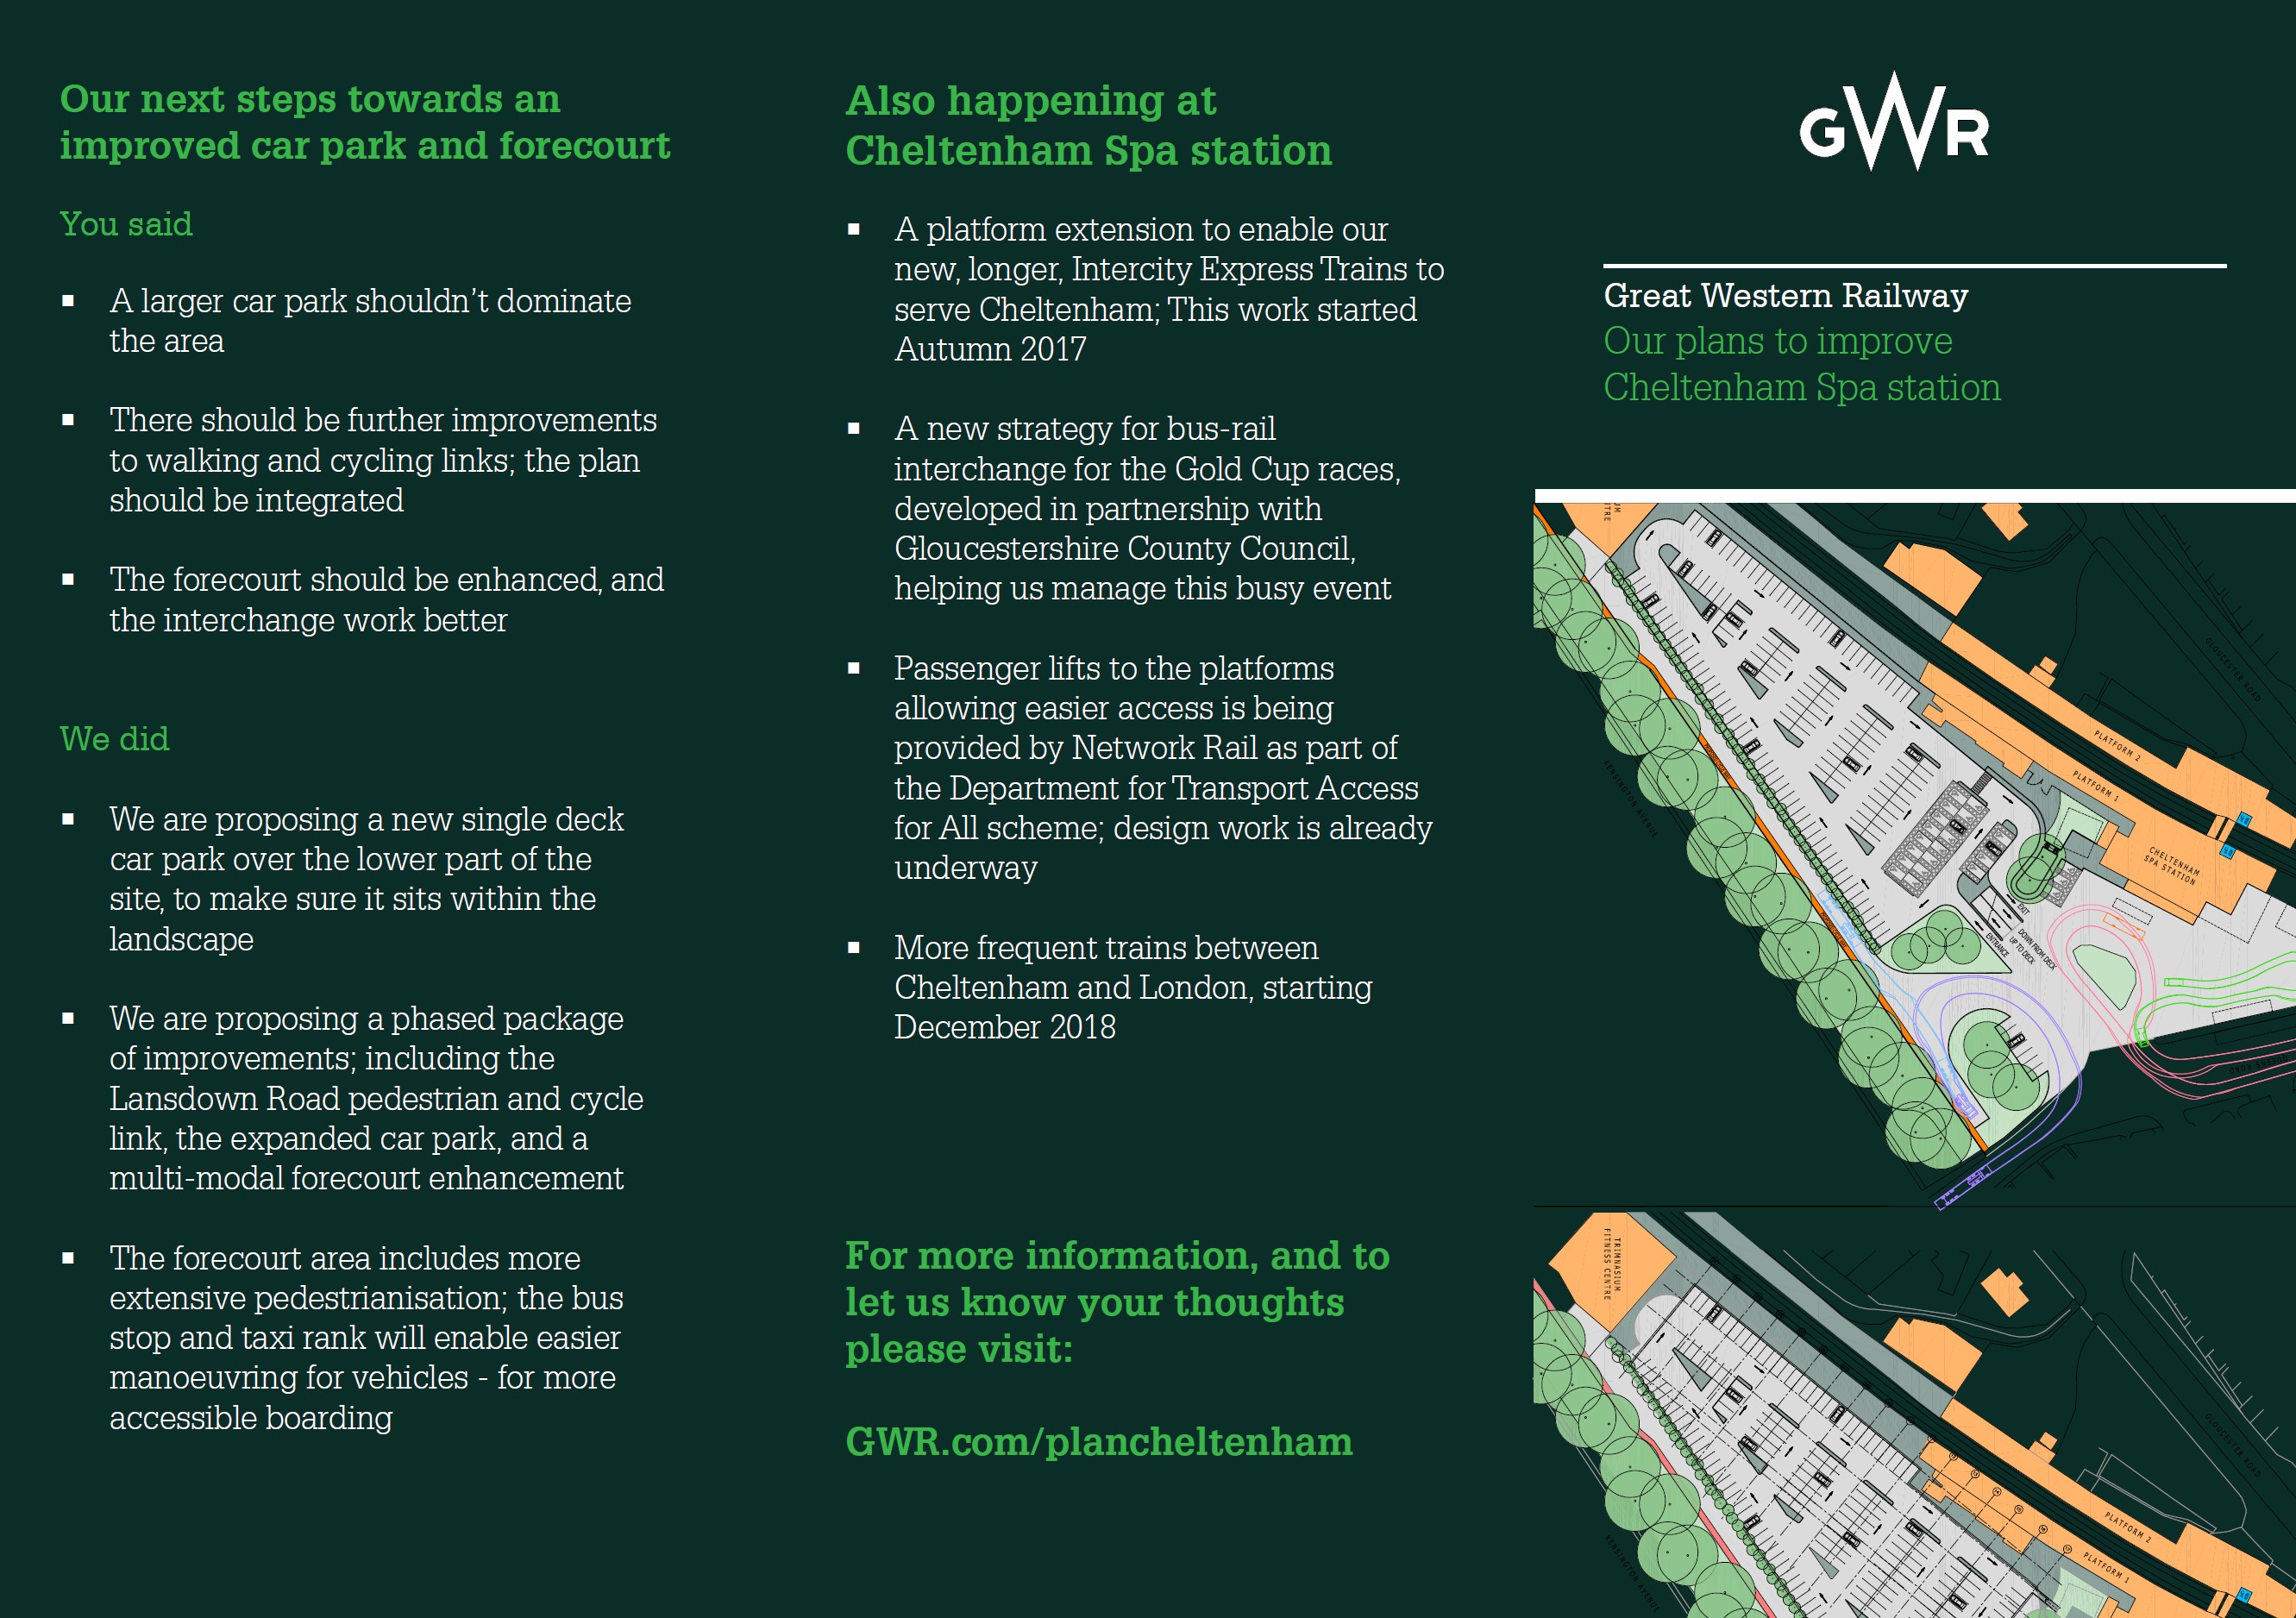 The original GWR campaign leaflet advertising the scheme, describing a phased package of improvements including the Lansdown Road pedestrian and cycle link to the Honeybourne Line